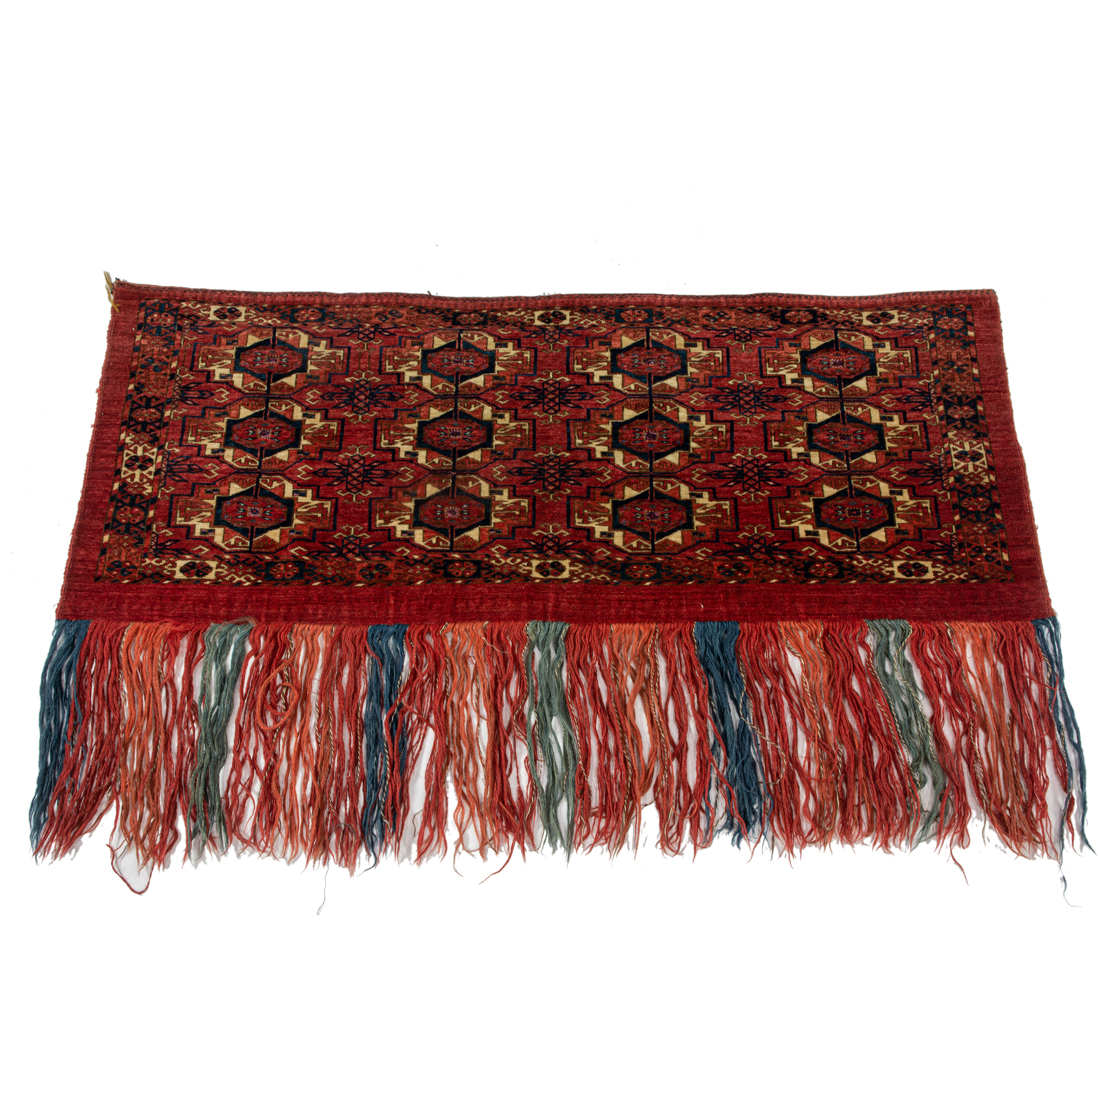 AN AFGHAN TENT HANGING, 1'7" X